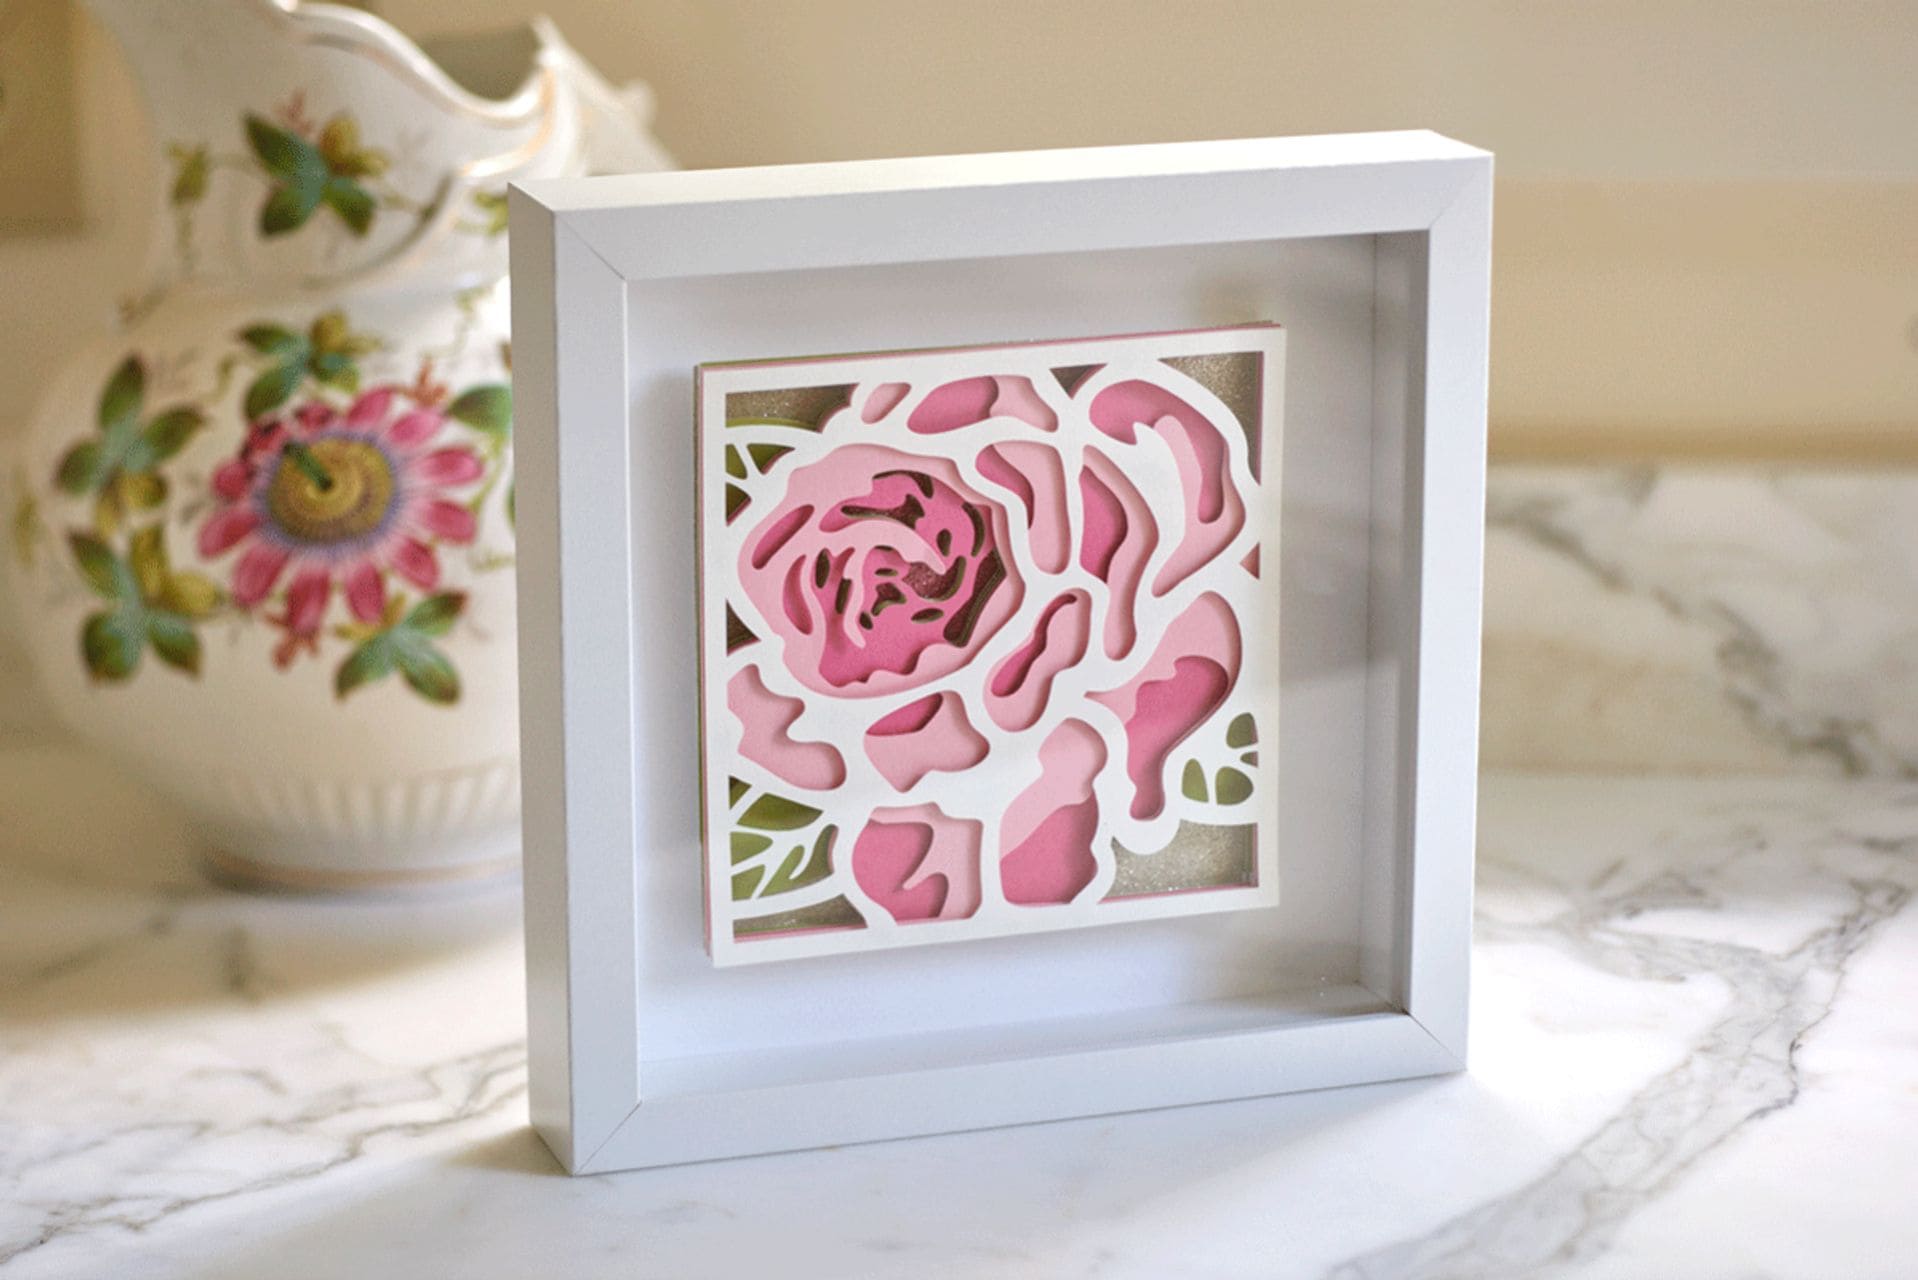 Framed rose picture made from layers of paper